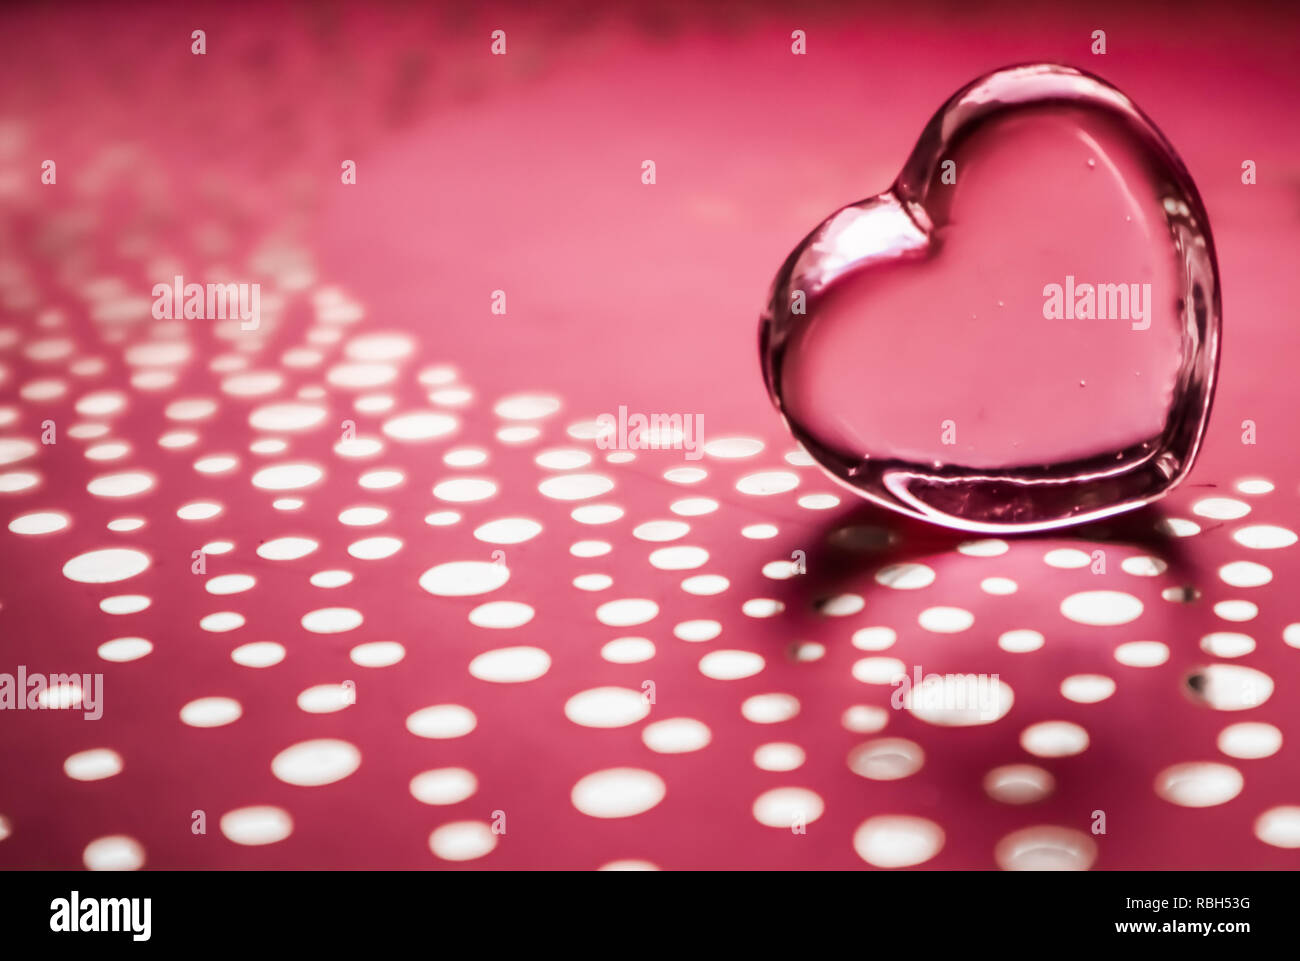 Shining transparent heart. Perfect Valentine's Day greeting card background. Horizontal image in pink tone Stock Photo